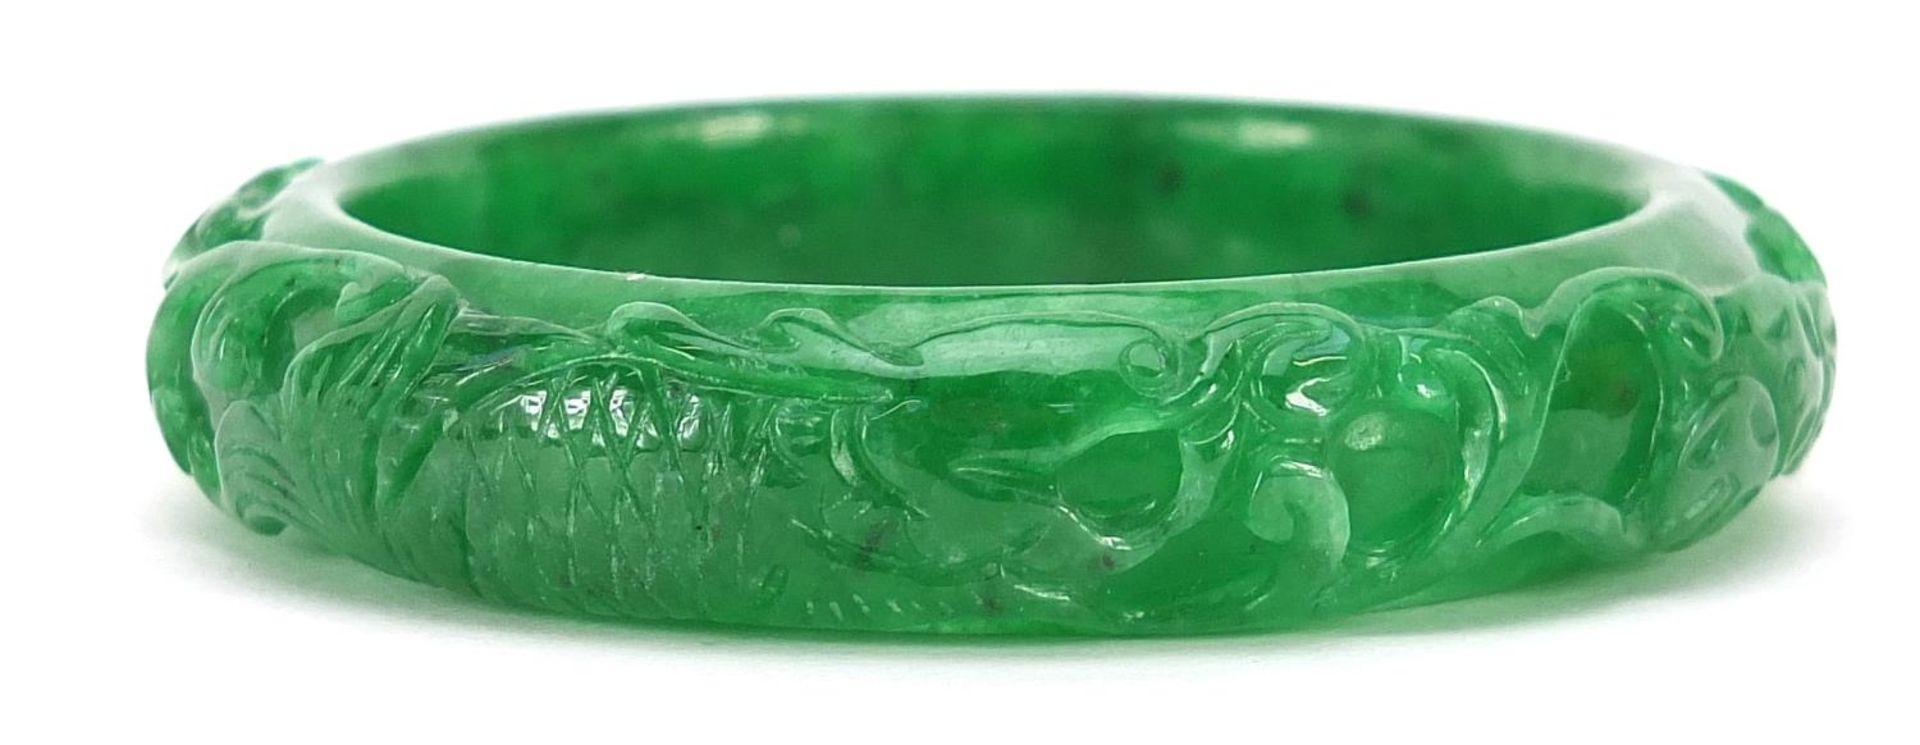 Chinese green jade bangle carved with a fish amongst aquatic foliage, 7cm in diameter, 56.7g